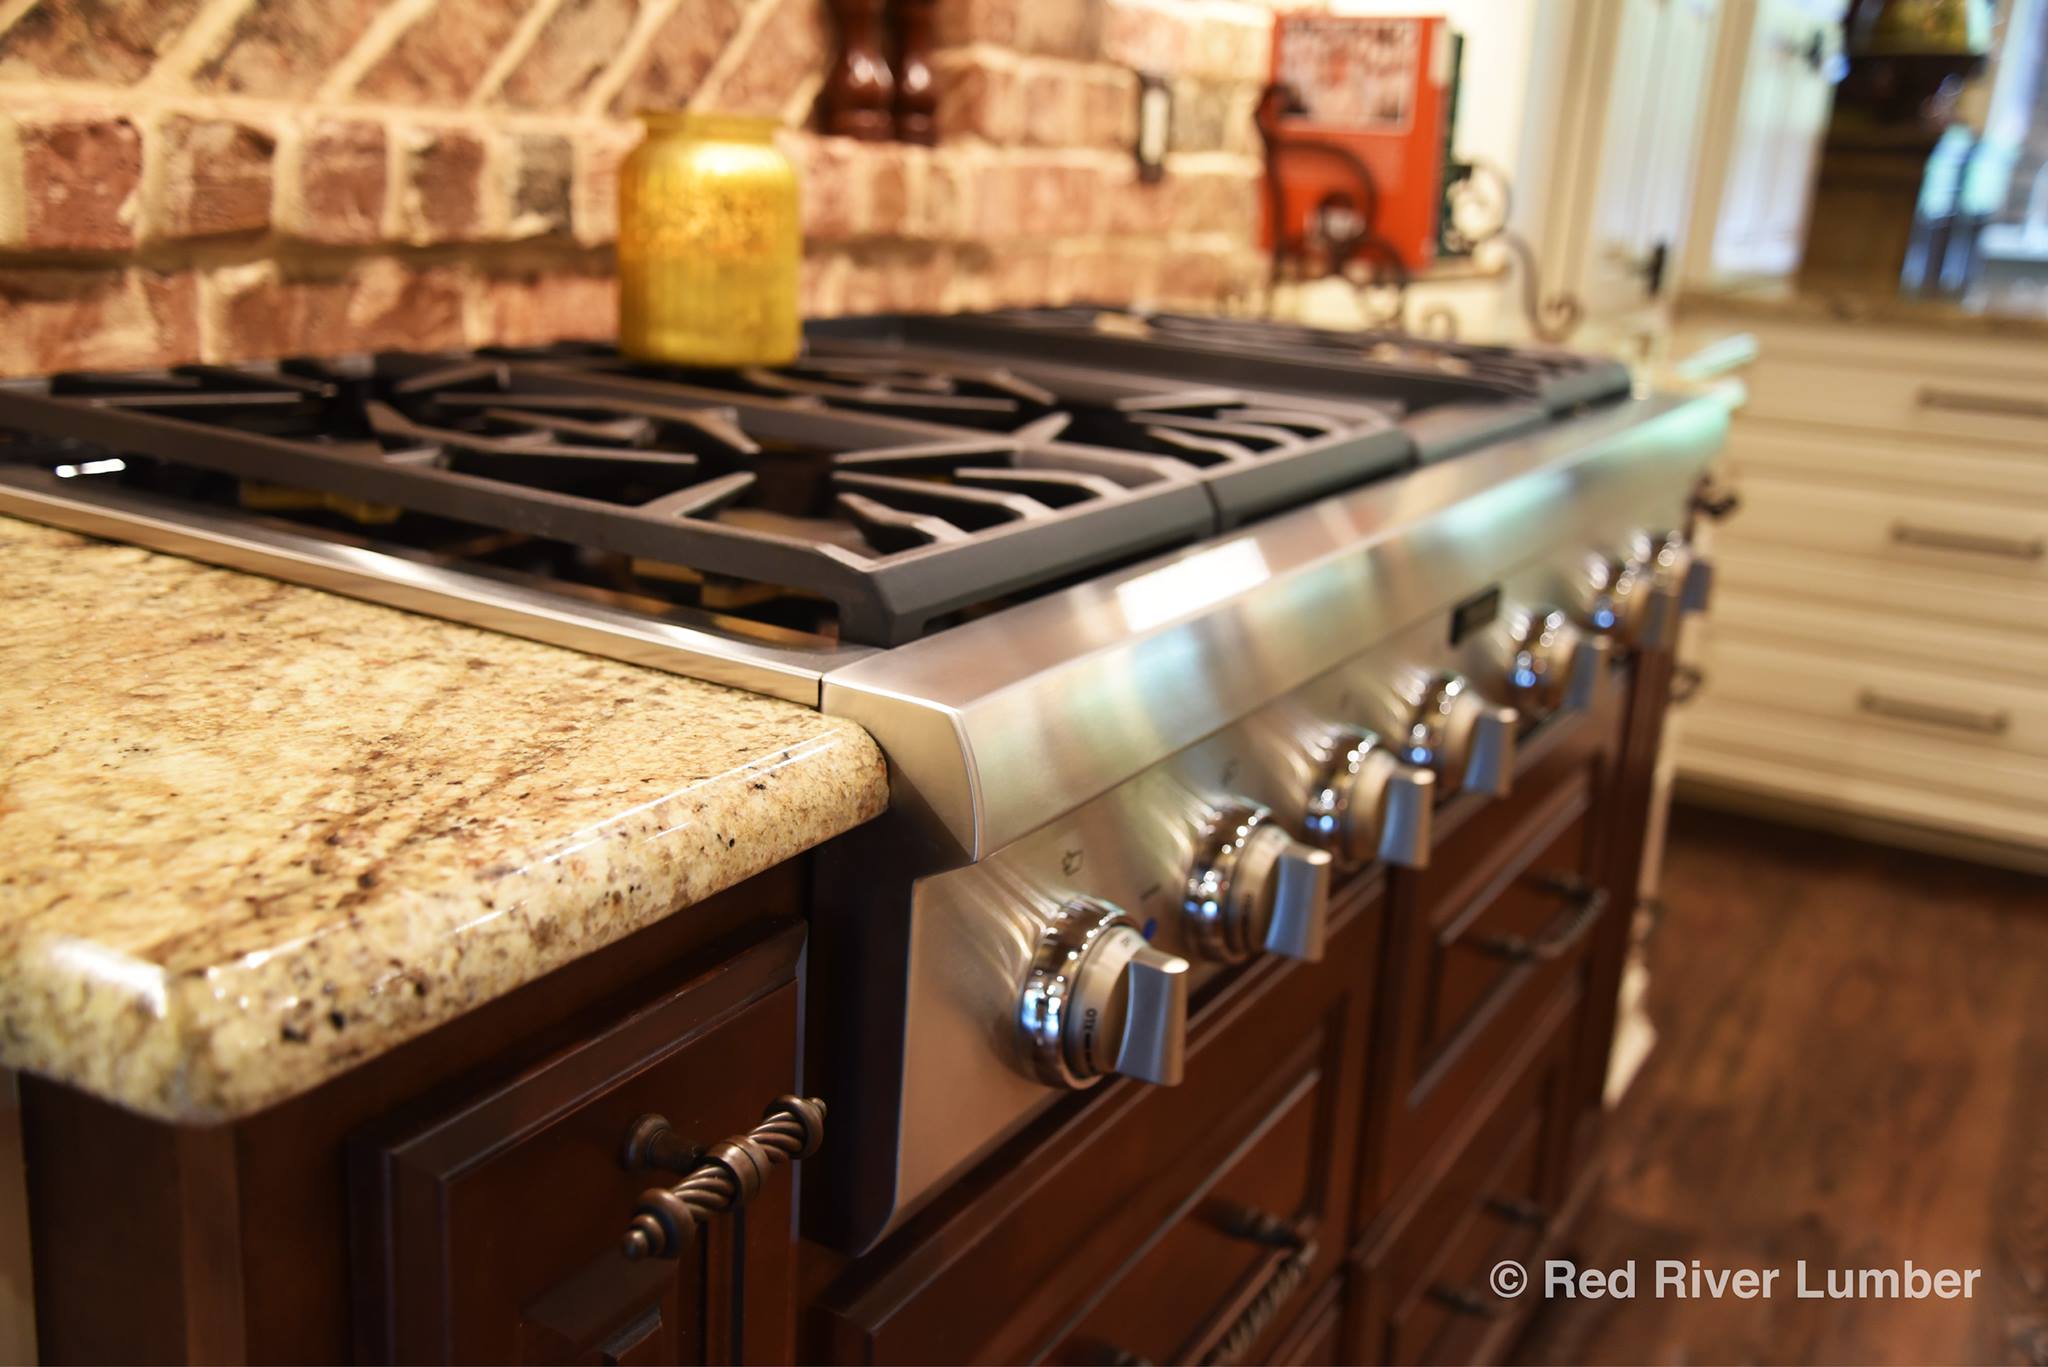  We supplied the  Thermador &nbsp;30-inch Double Oven,&nbsp; Thermador &nbsp;48-Inch Gas Rangetop, and Siena Beige Granite Countertops. 